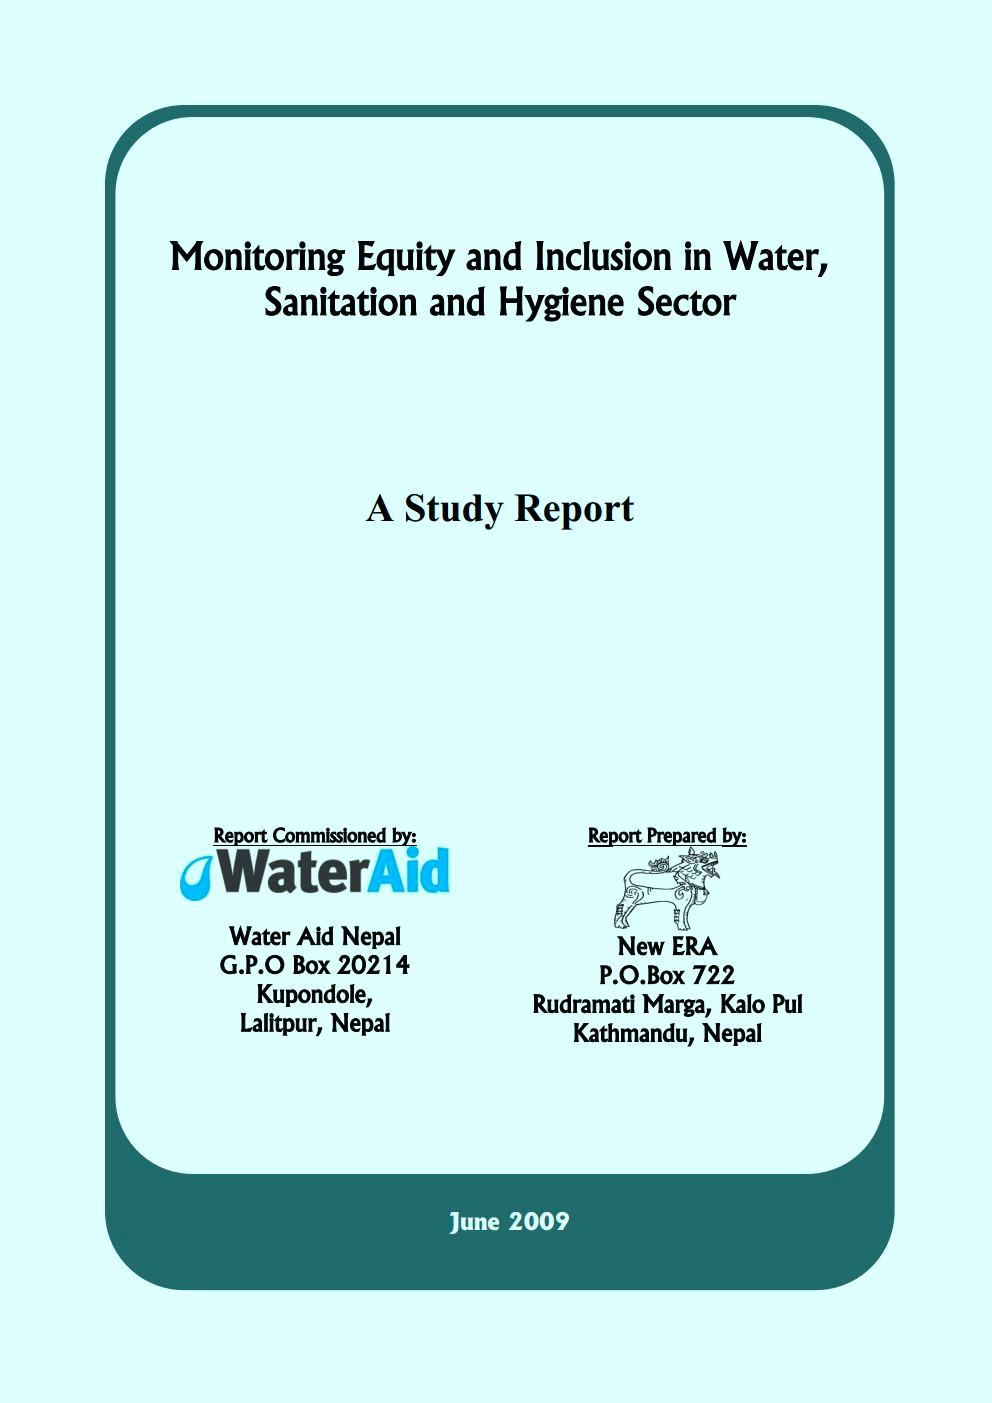 Monitoring Equity and Inclusion in Water, Sanitation and Hygiene Sector – A Study Report